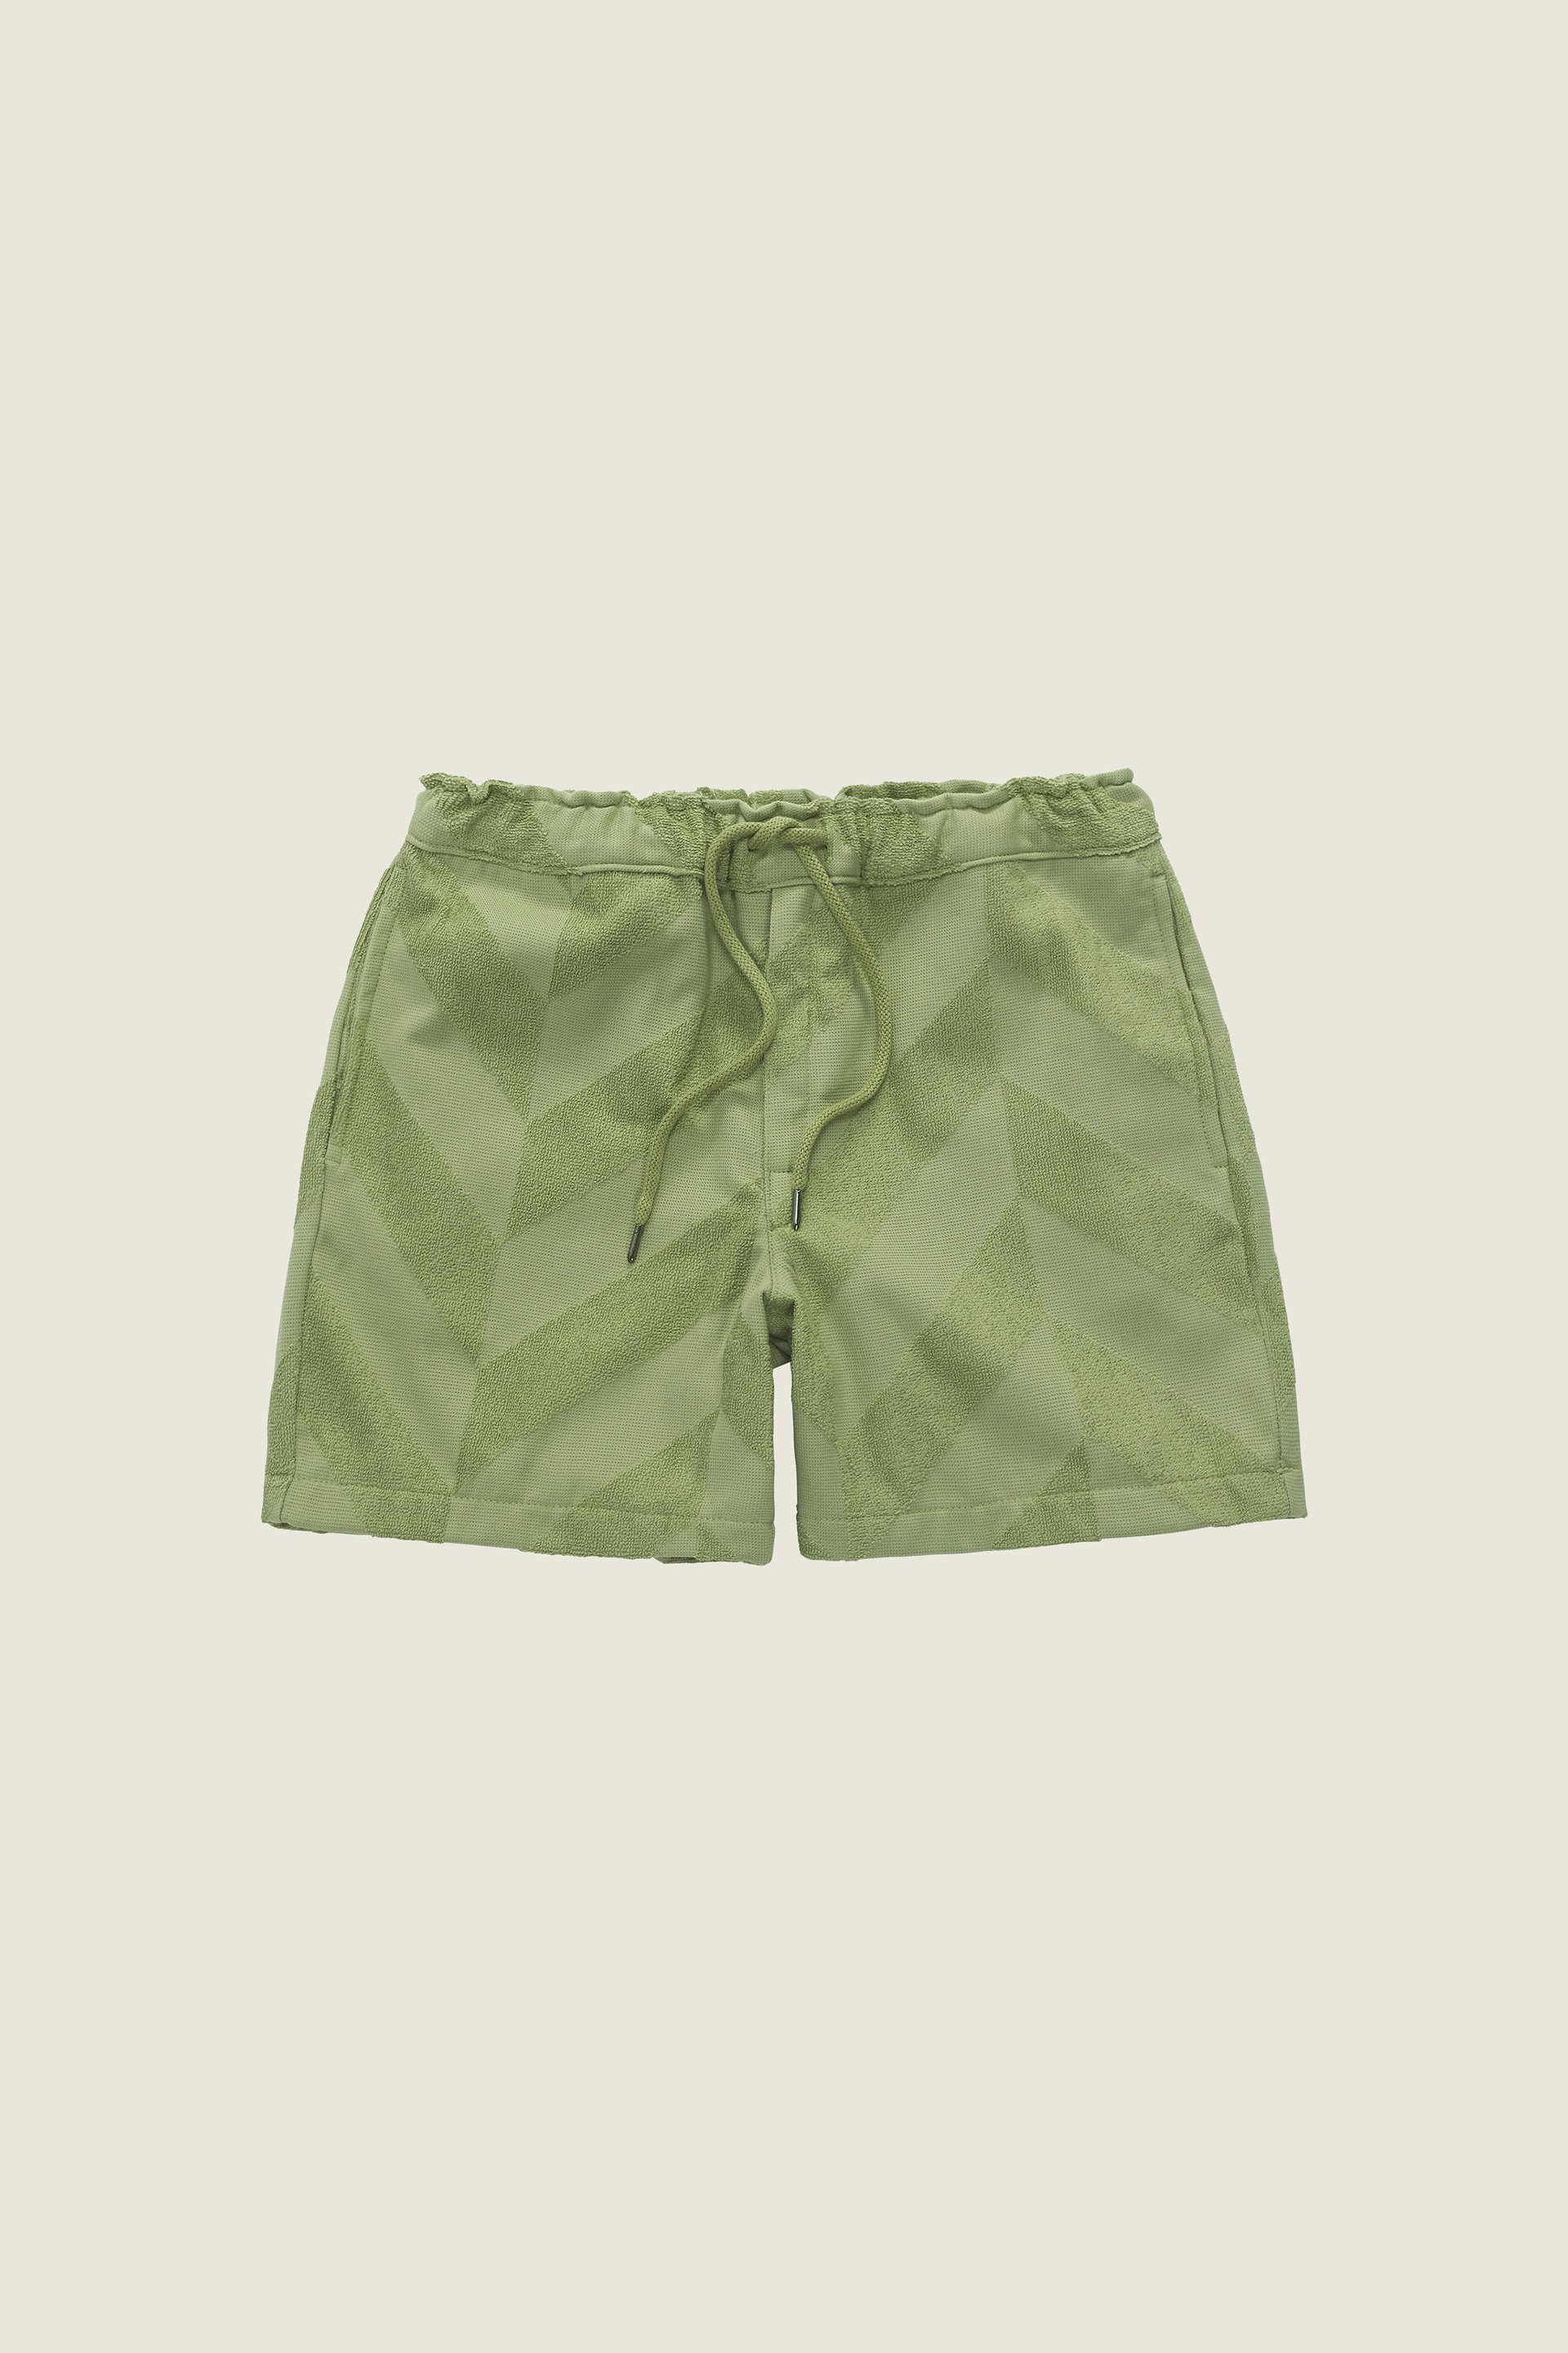 Sculpted Herring Terry Shorts